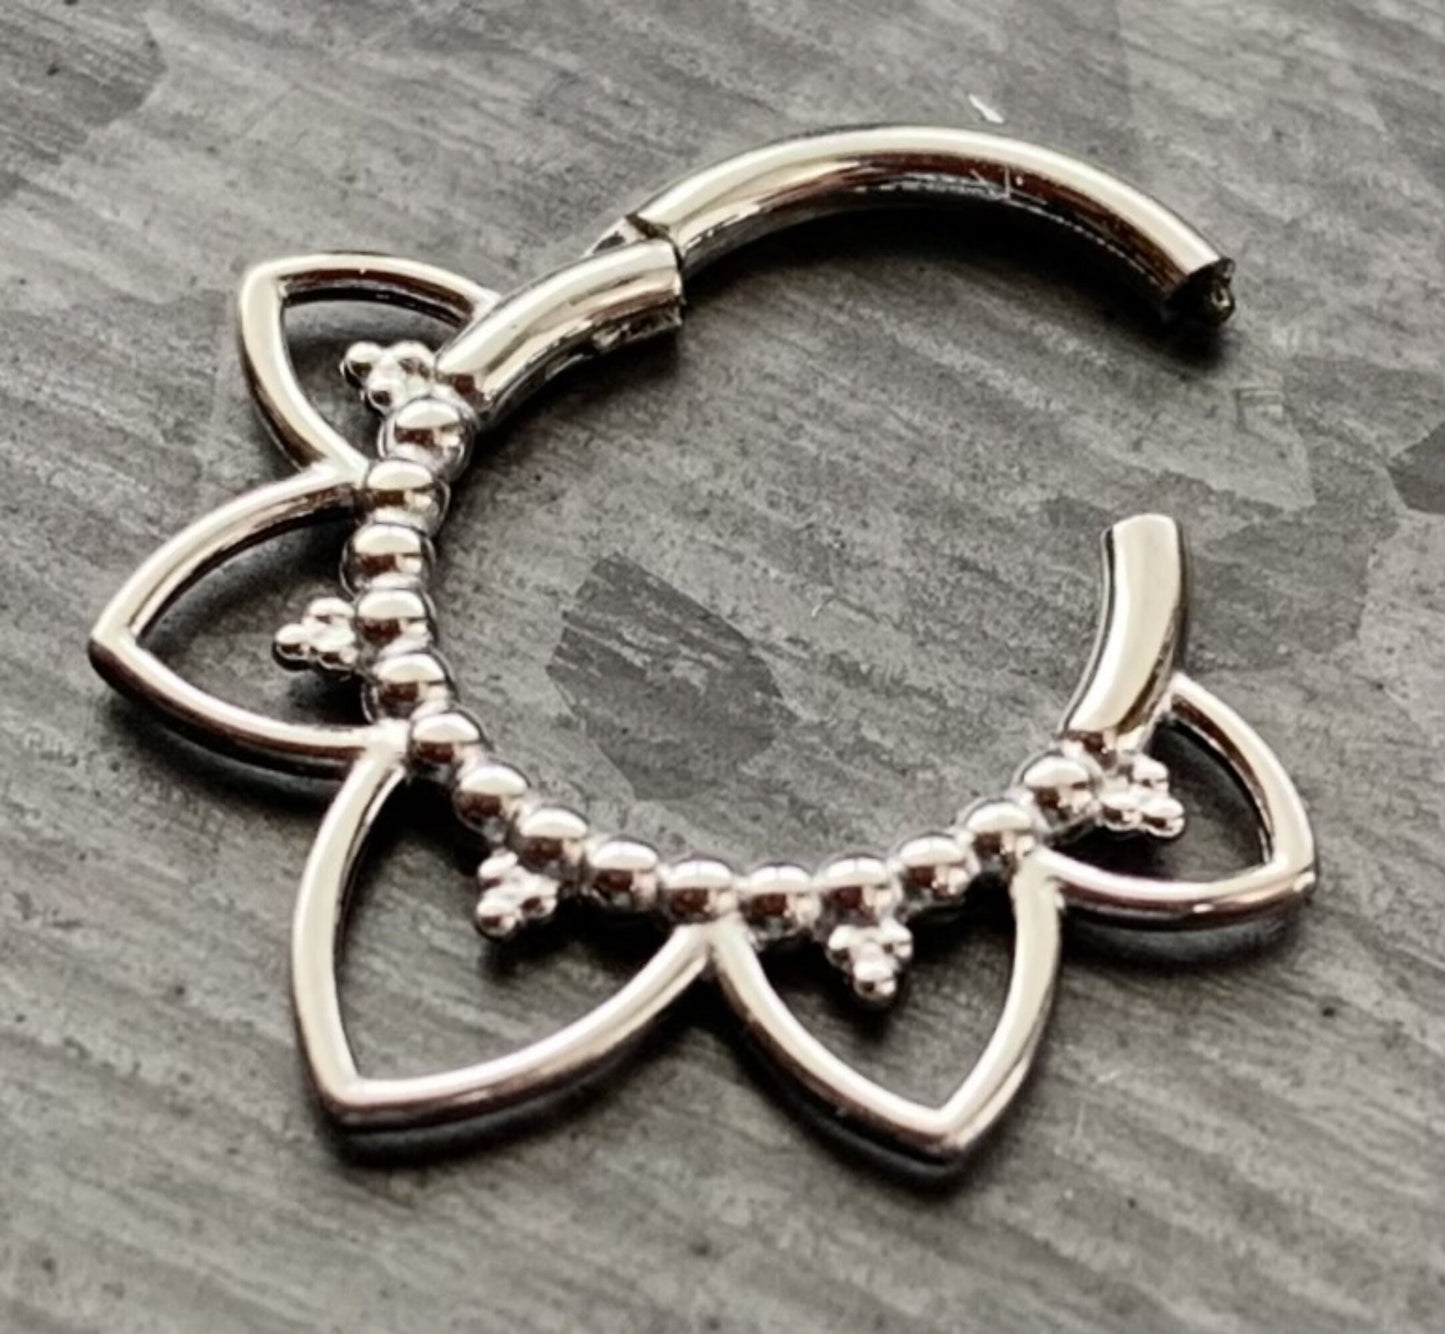 1 Piece Beautiful Filigree Petals Surgical Steel 16g Hinged Segment Ring - Black, Steel, Gold, Rose Gold available!